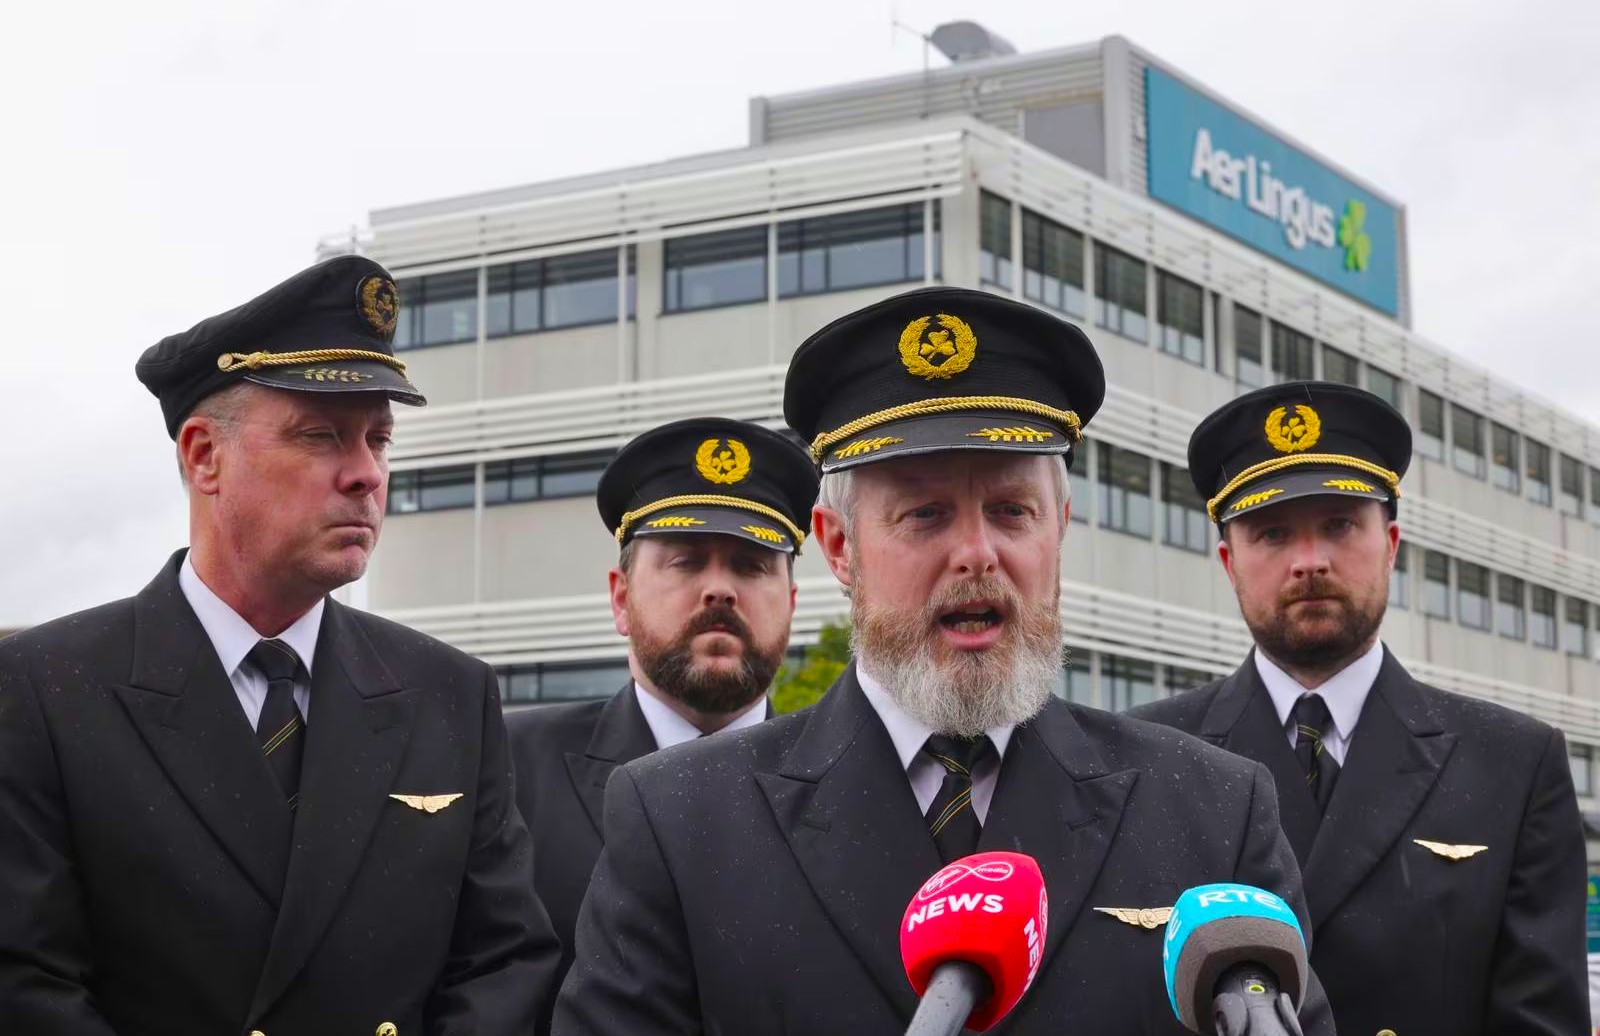 Aer Lingus and Irish Air Line Pilots' Association are to attend separate meetings at the Labour Court tomorrow to discuss the dispute.